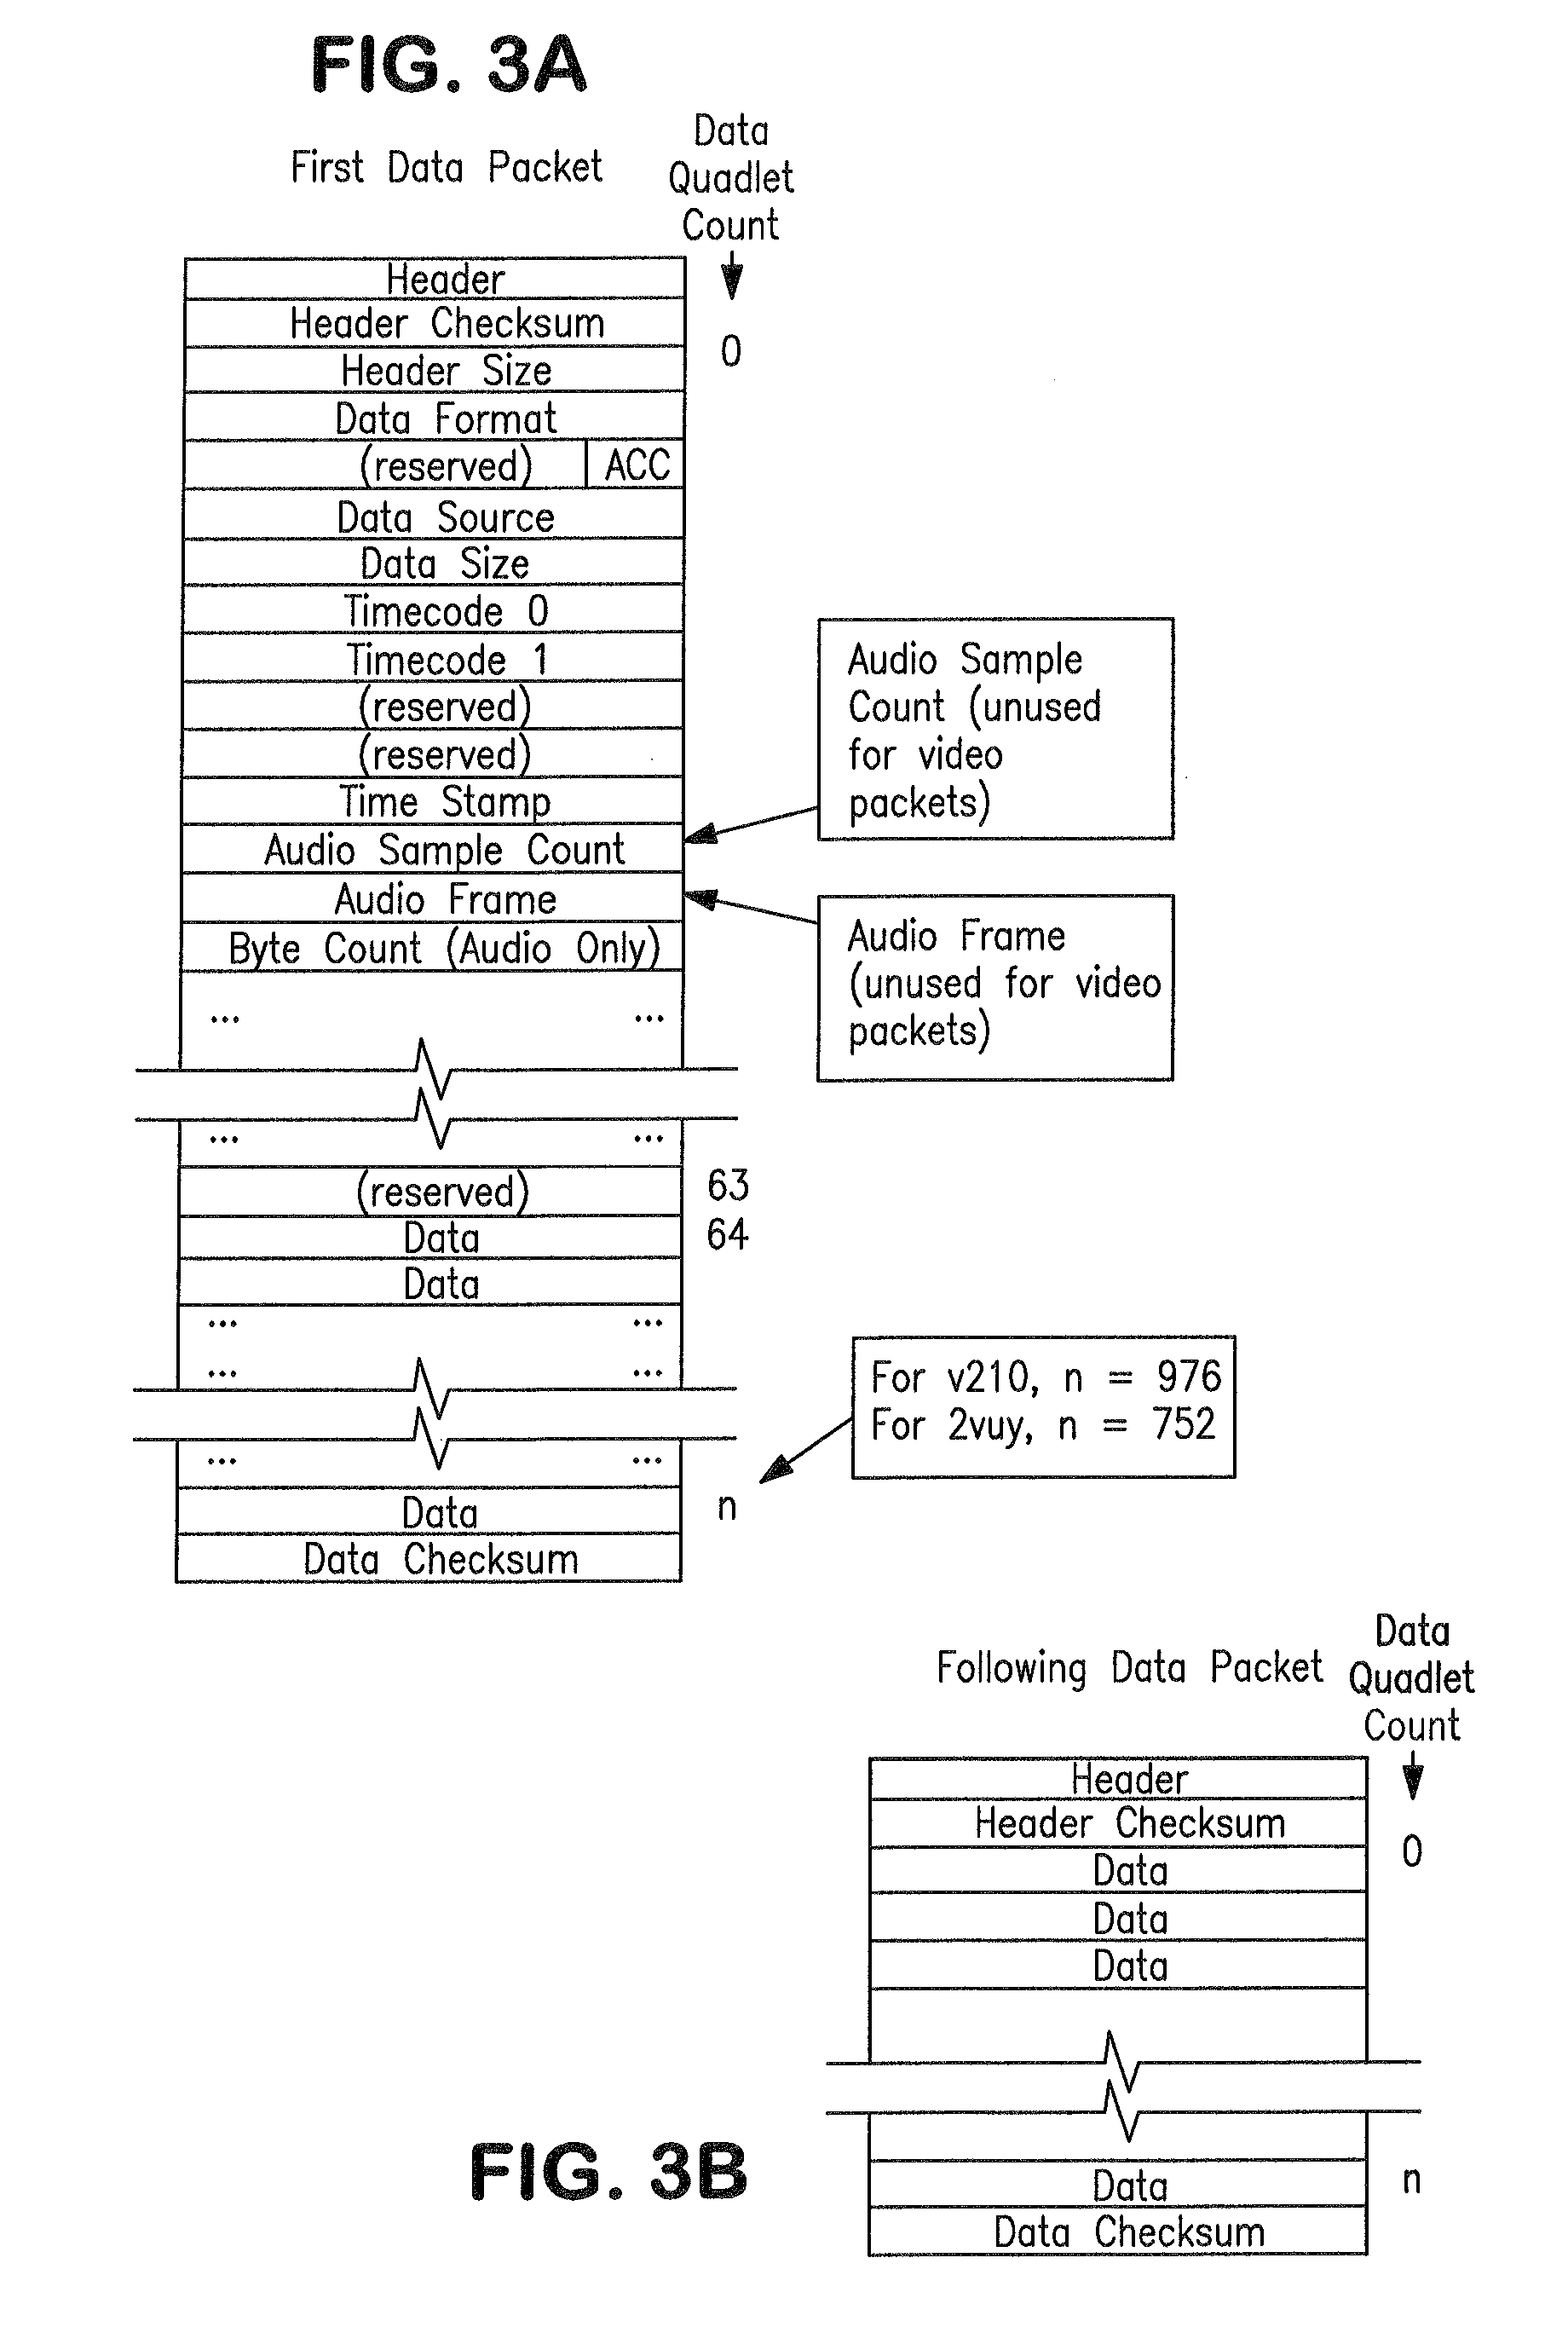 Synchronized transmission of audio and video data from a computer to a client via an interface